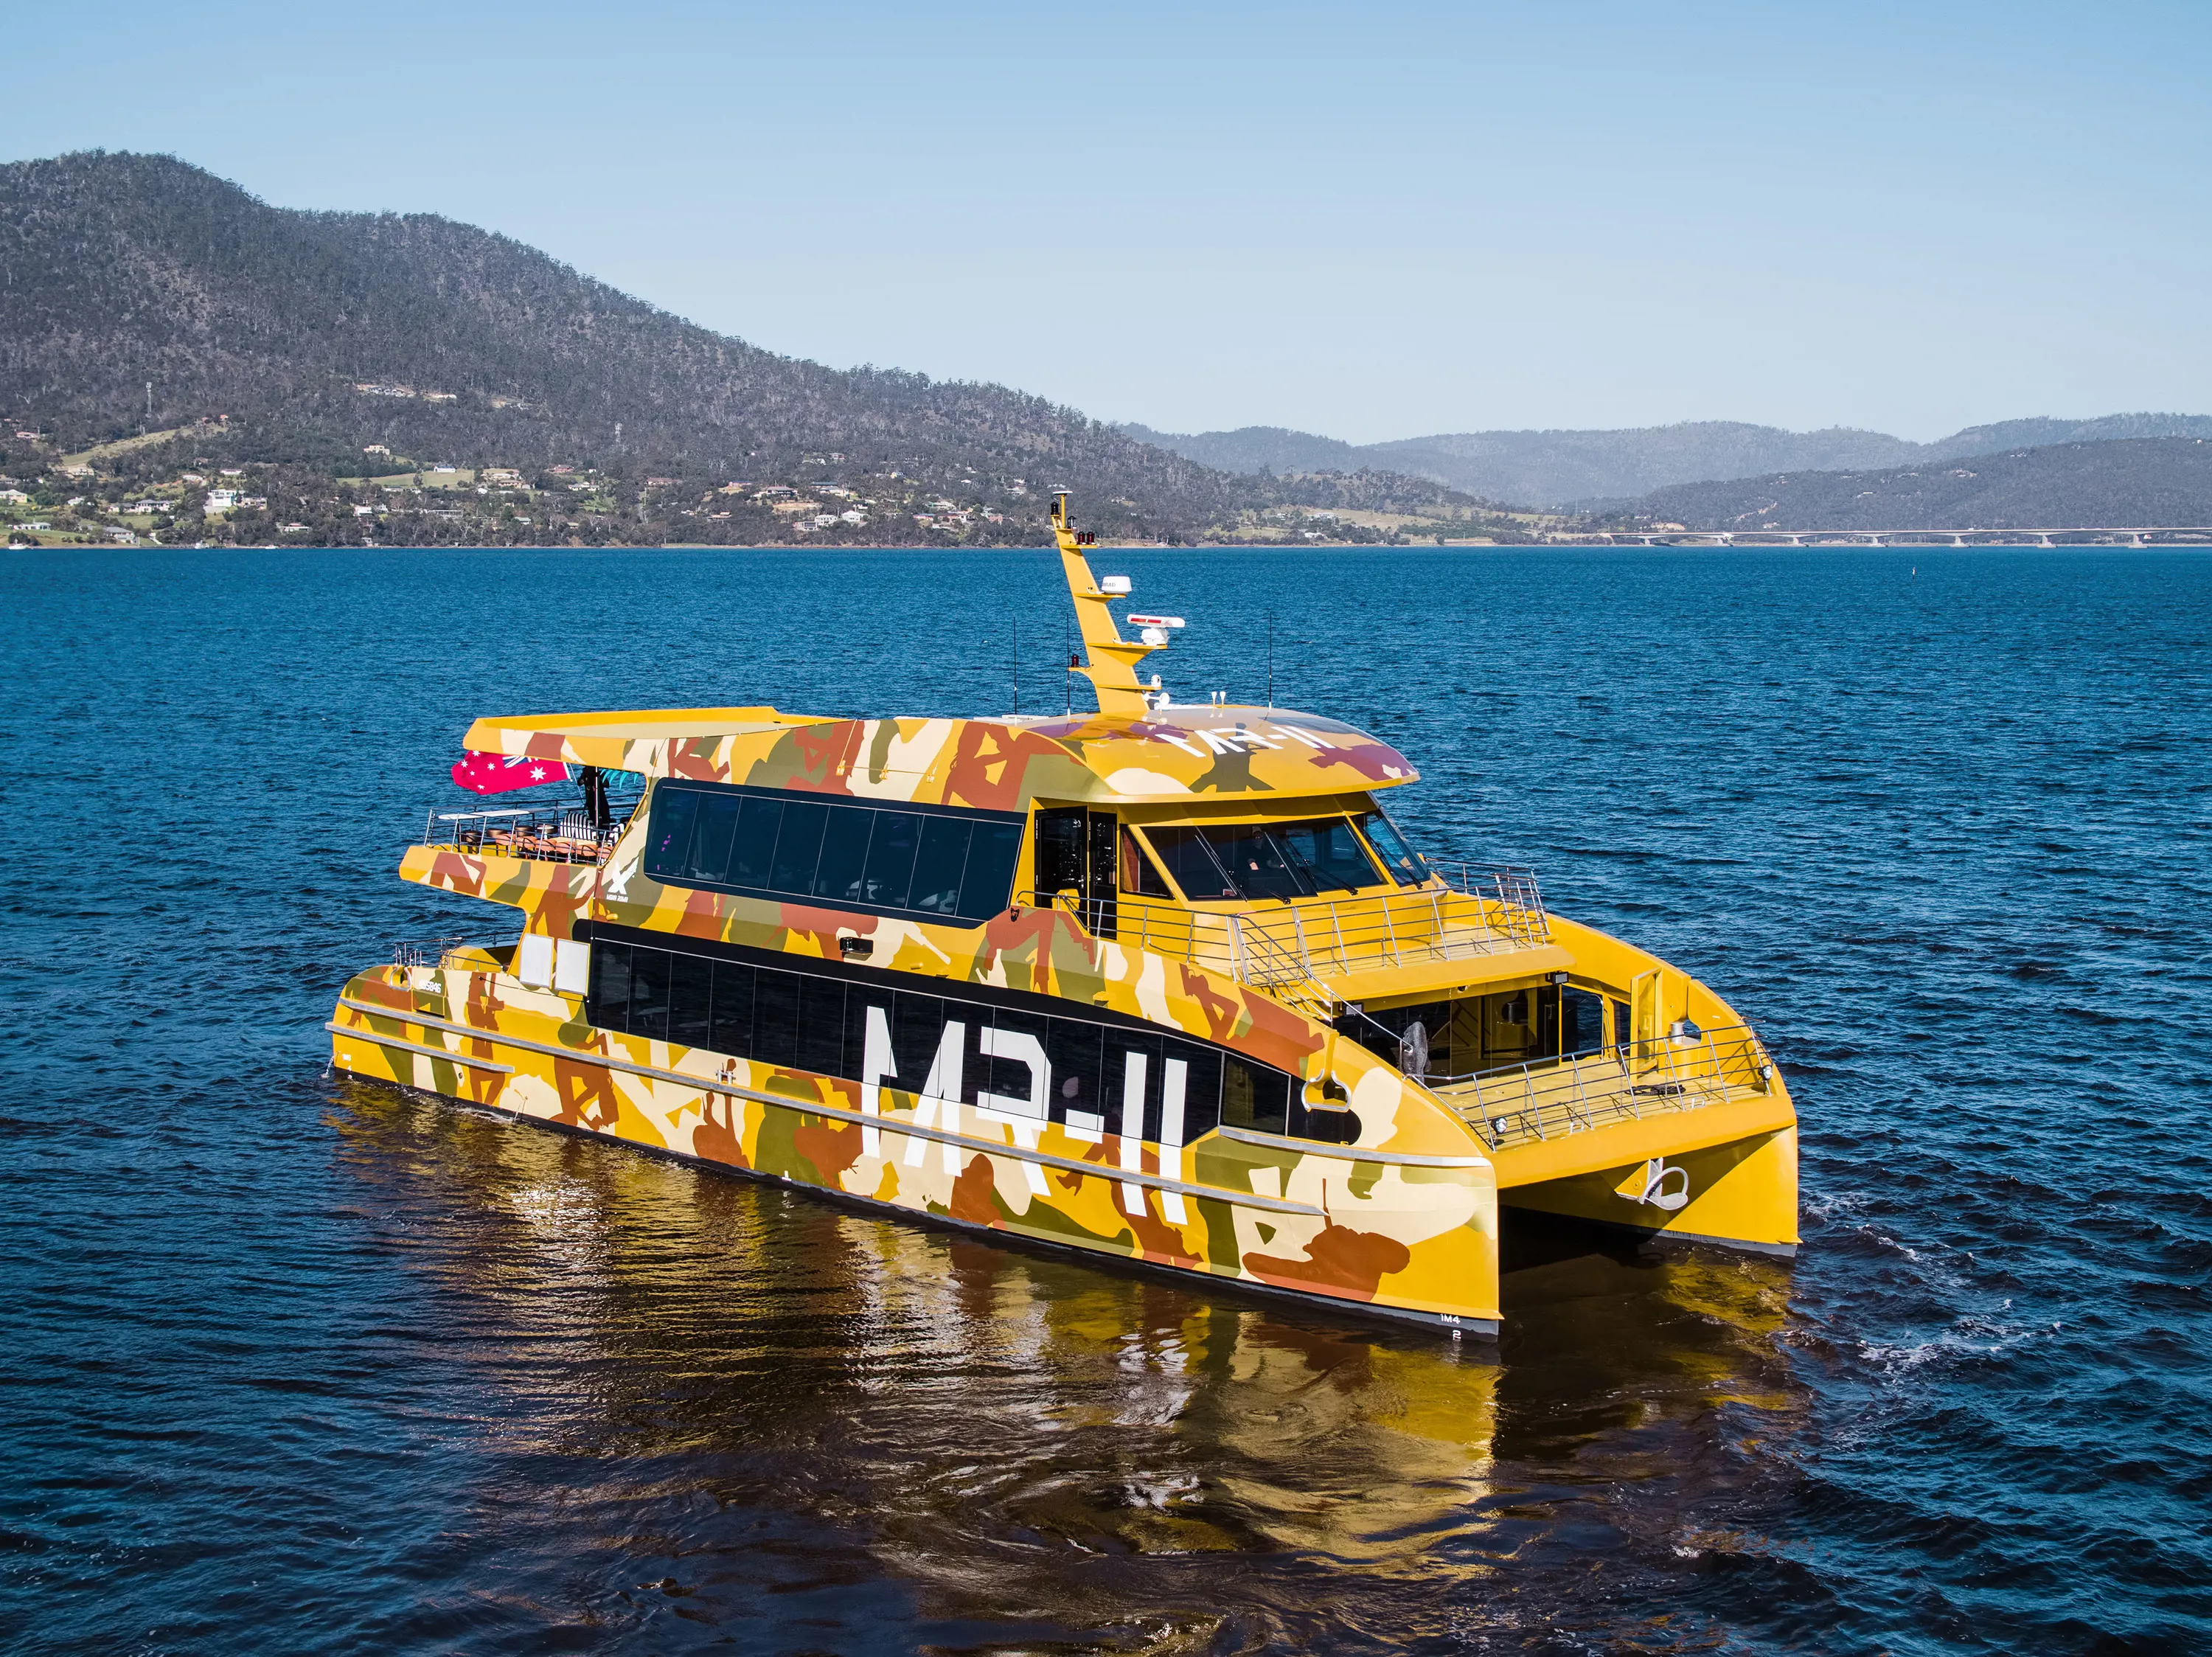 A yellow and brown camouflaged patterned catamaran cruiser on calm waters.